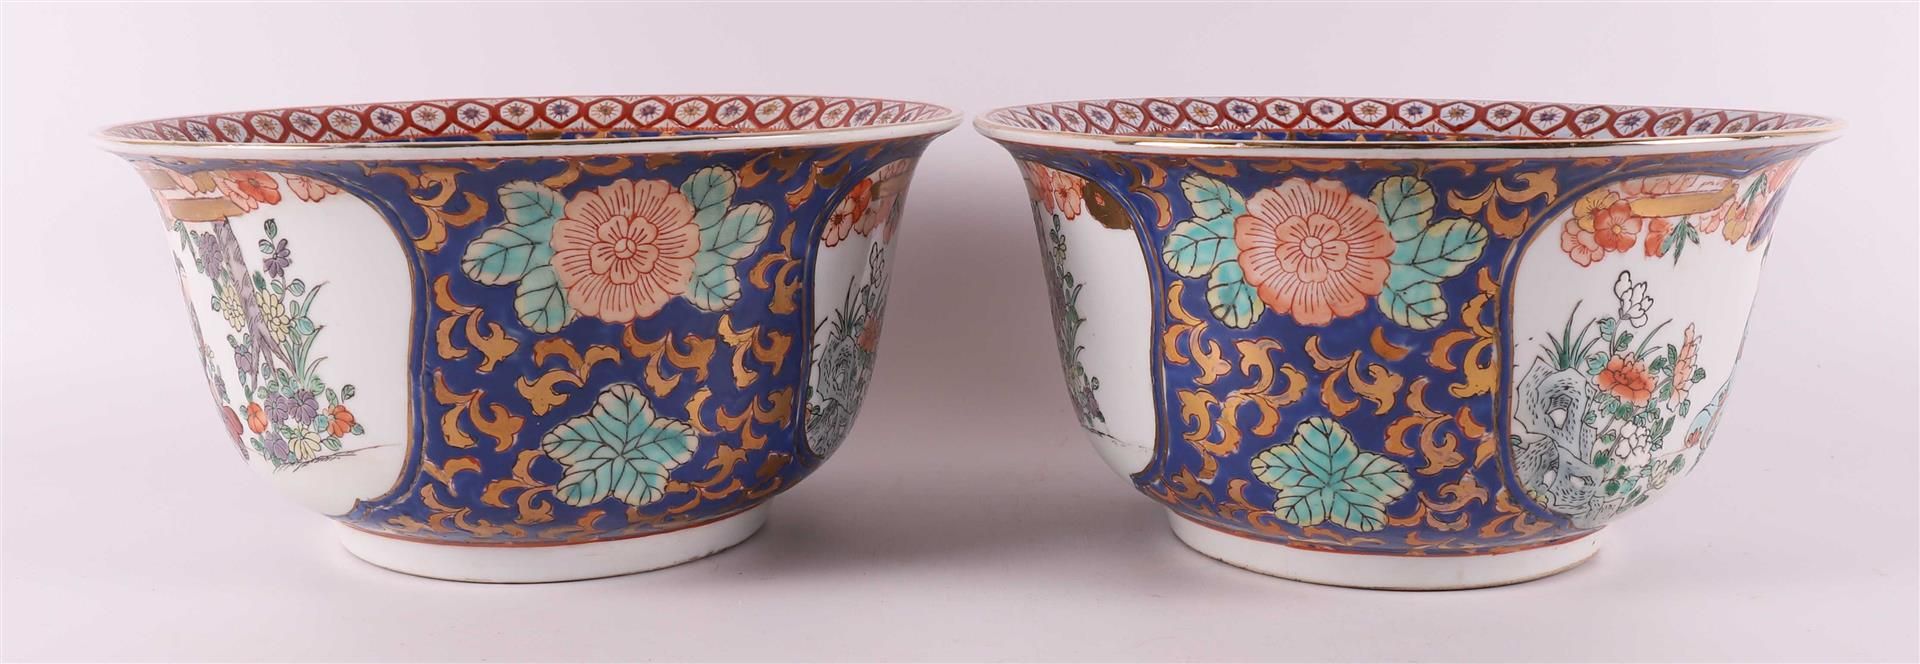 A pair of porcelain bowls on a stand, Japan, 20th century. - Image 4 of 8